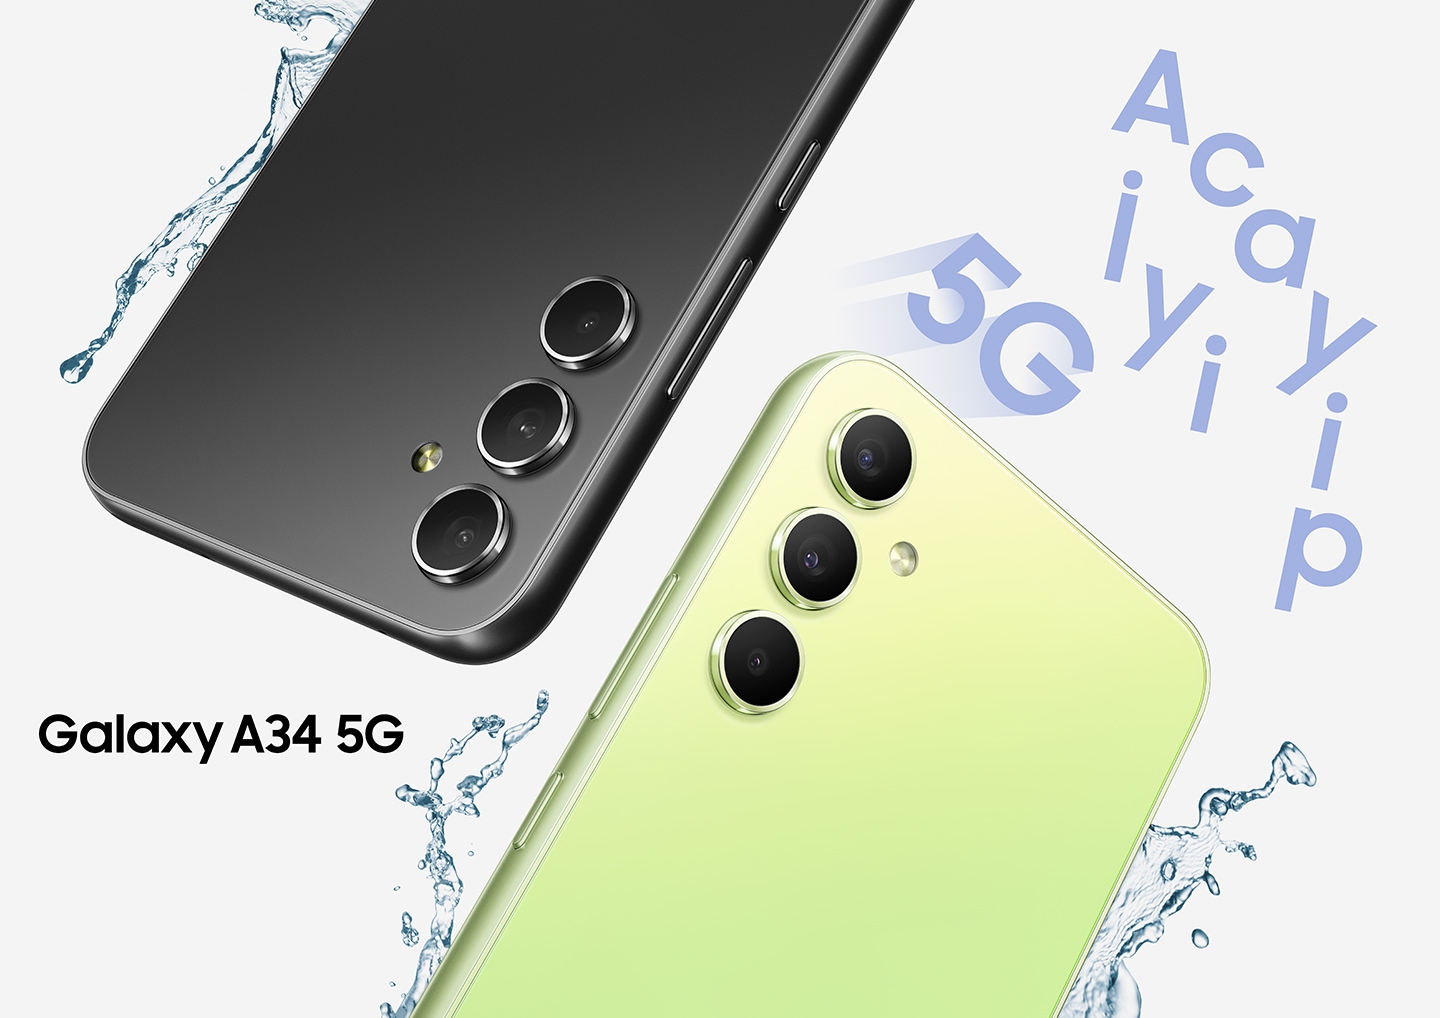 Two Galaxy A34 5Gs show their top halves of their backsides, one in Awesome Violet and the other in Awesome Lime. Water droplets are splashing around the devices 